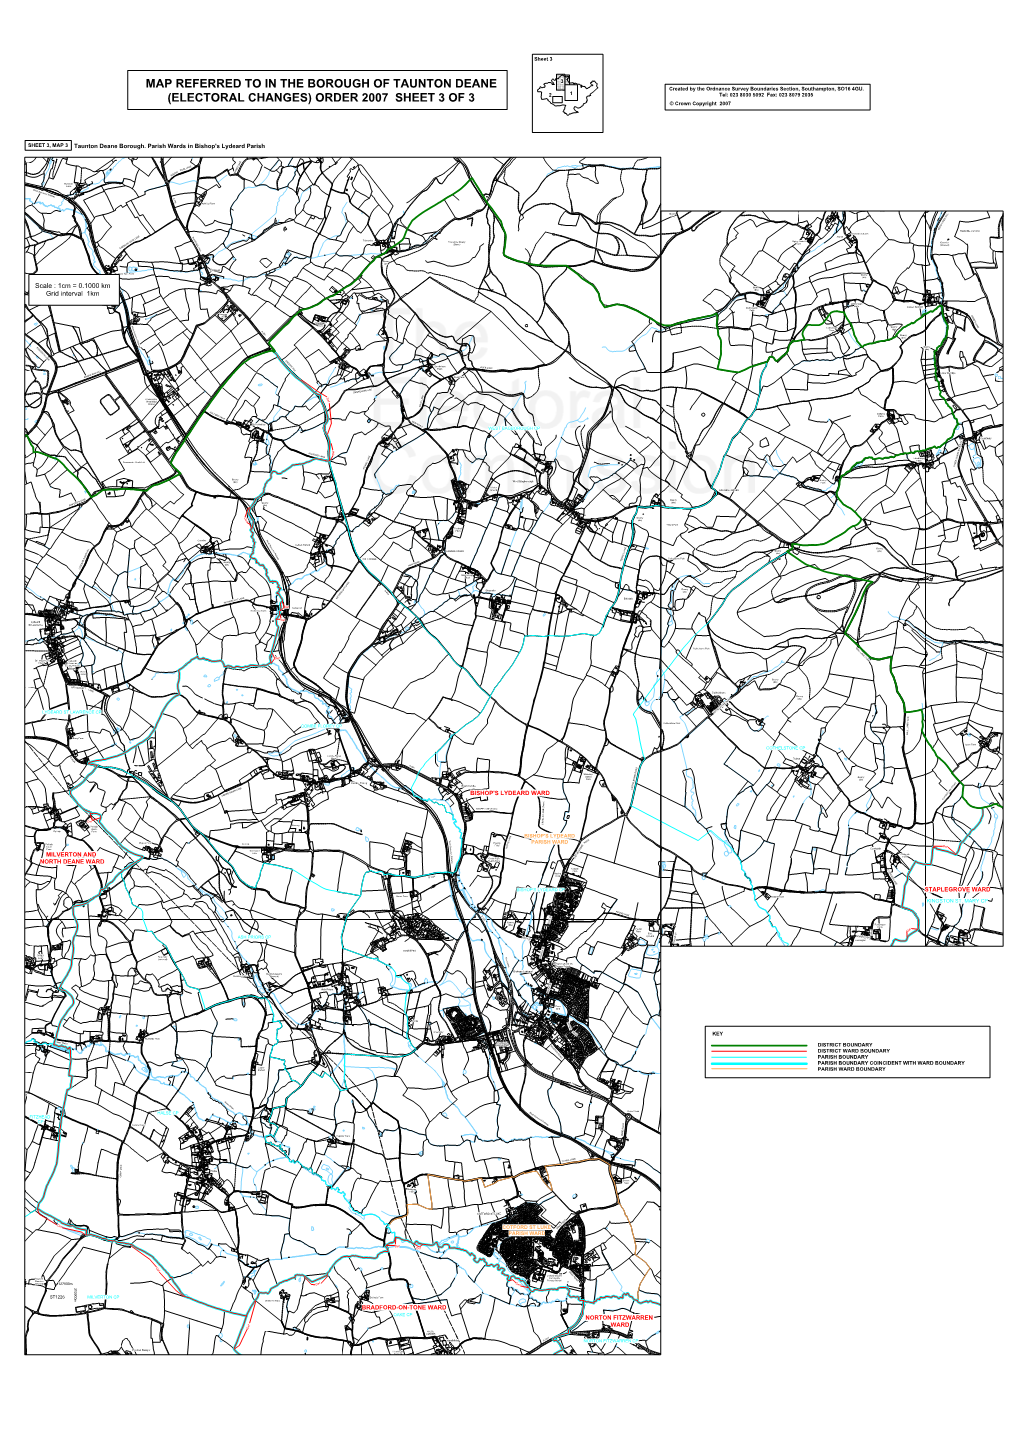 MAP REFERRED to in the BOROUGH of TAUNTON DEANE Created by the Ordnance Survey Boundaries Section, Southampton, SO16 4GU